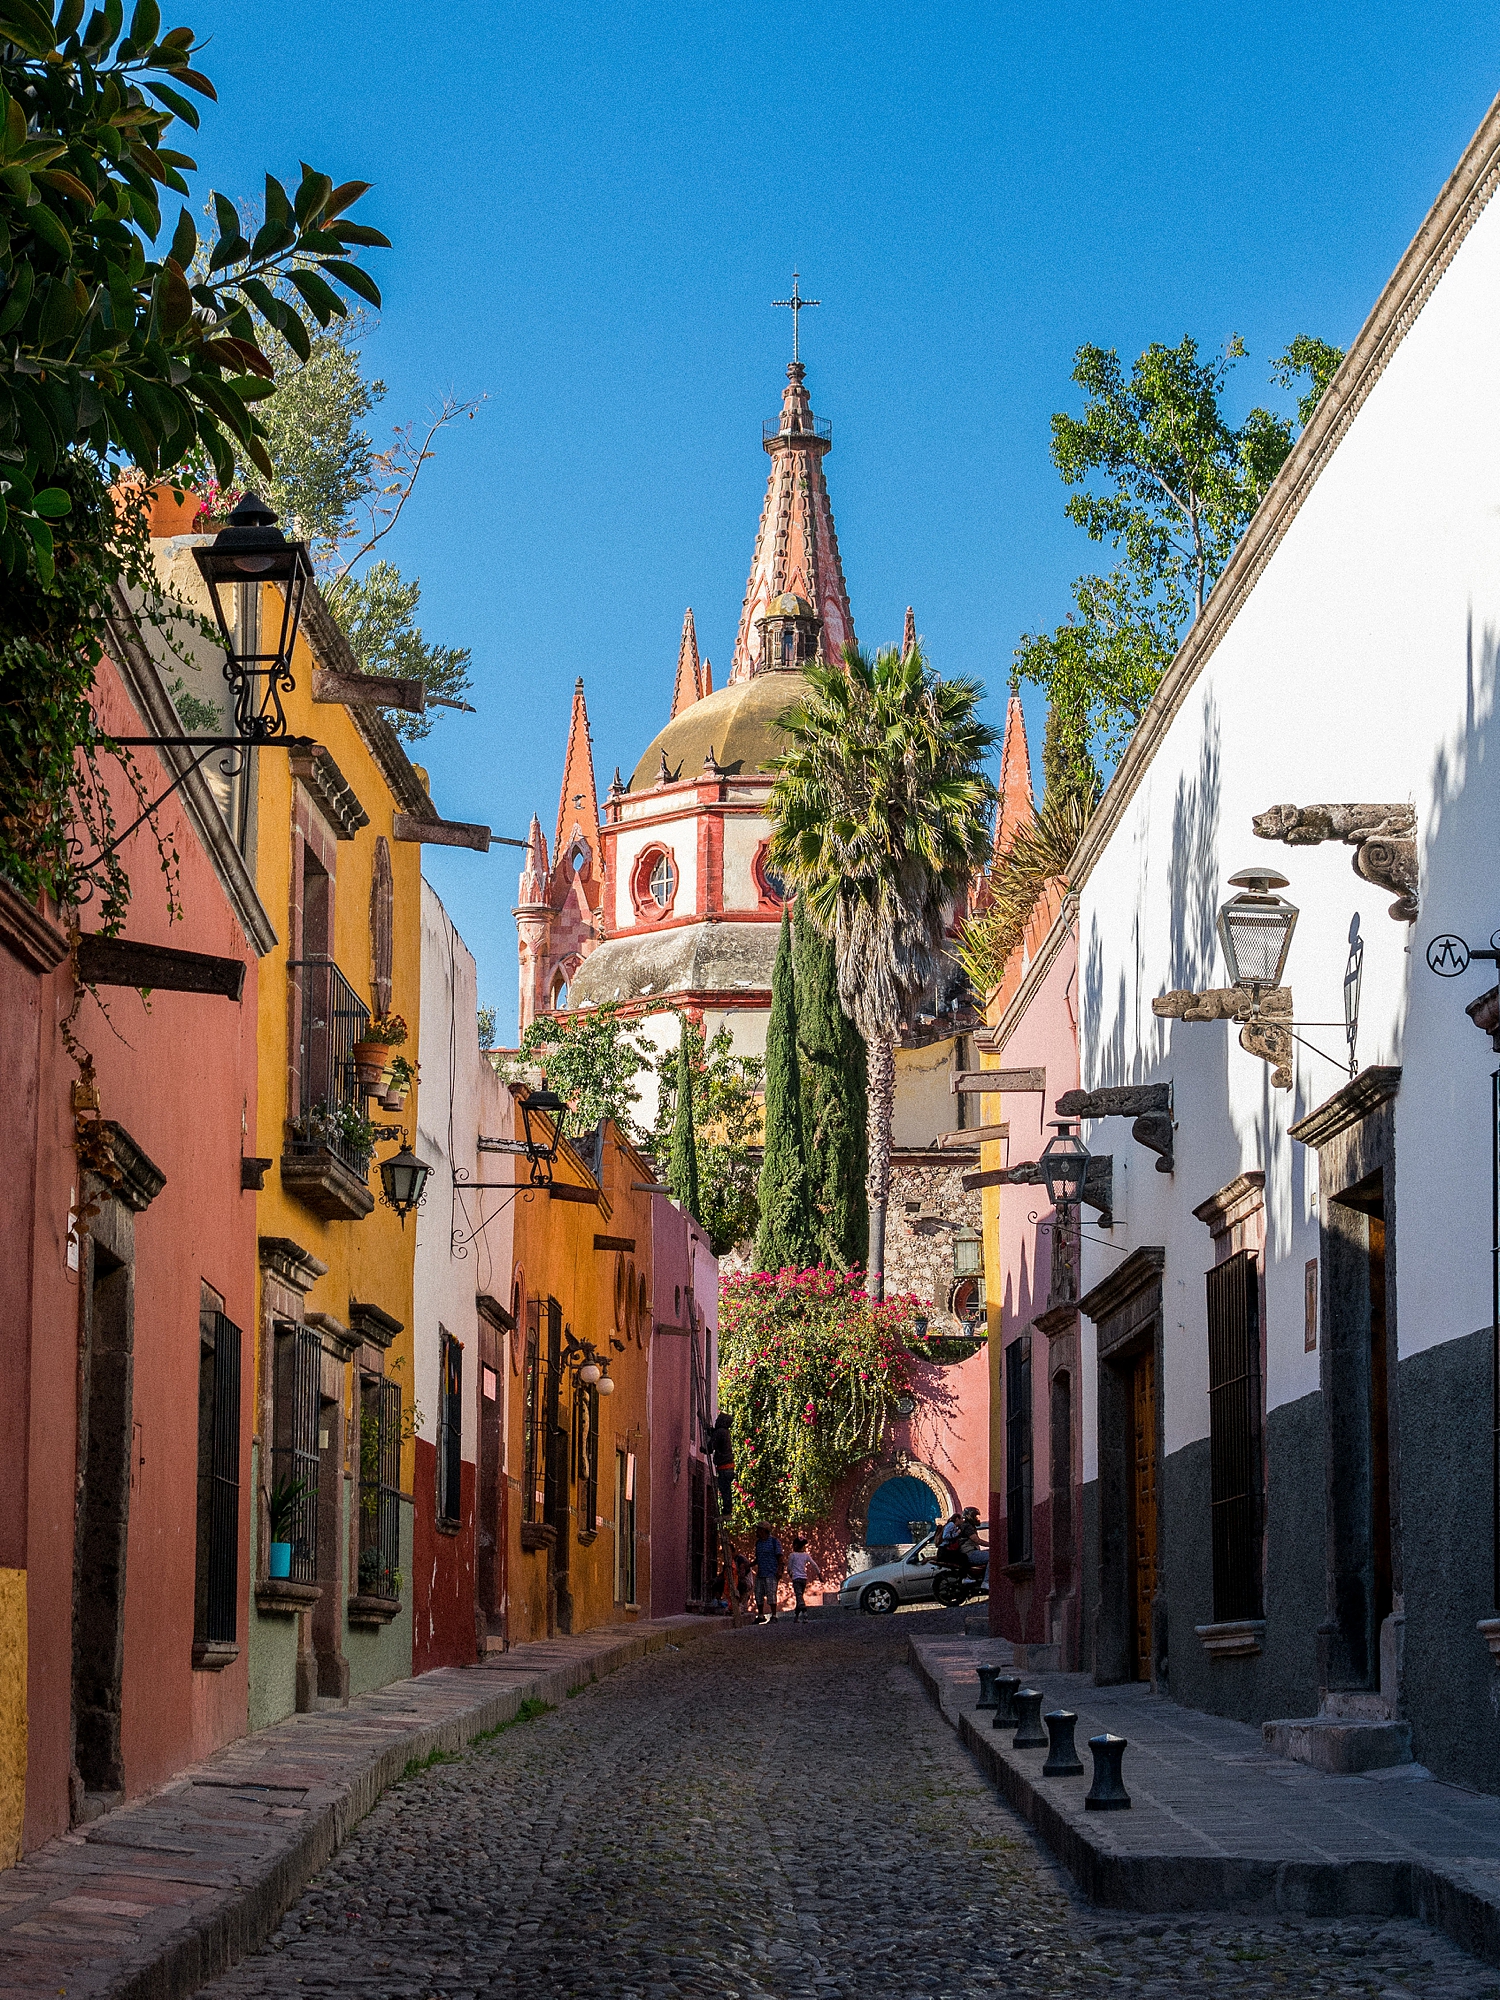 cobblestone street with colorful buildings in and church roofs San Miguel De Allende Mexico Wedding destination